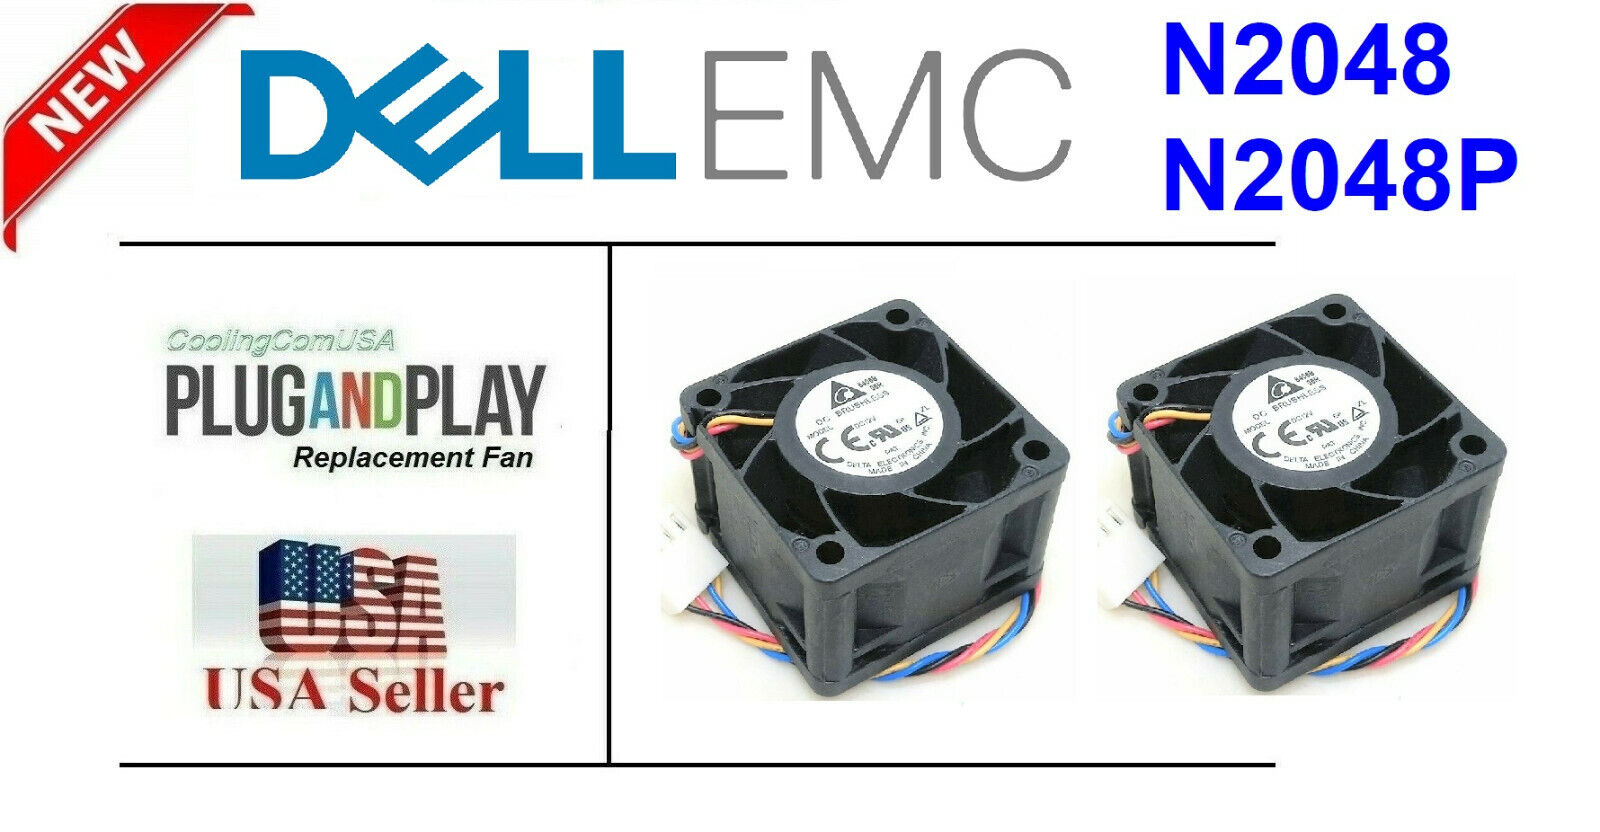 2x New Replacement Fans for Dell EMC PowerSwitch N2048 N2048P Fan